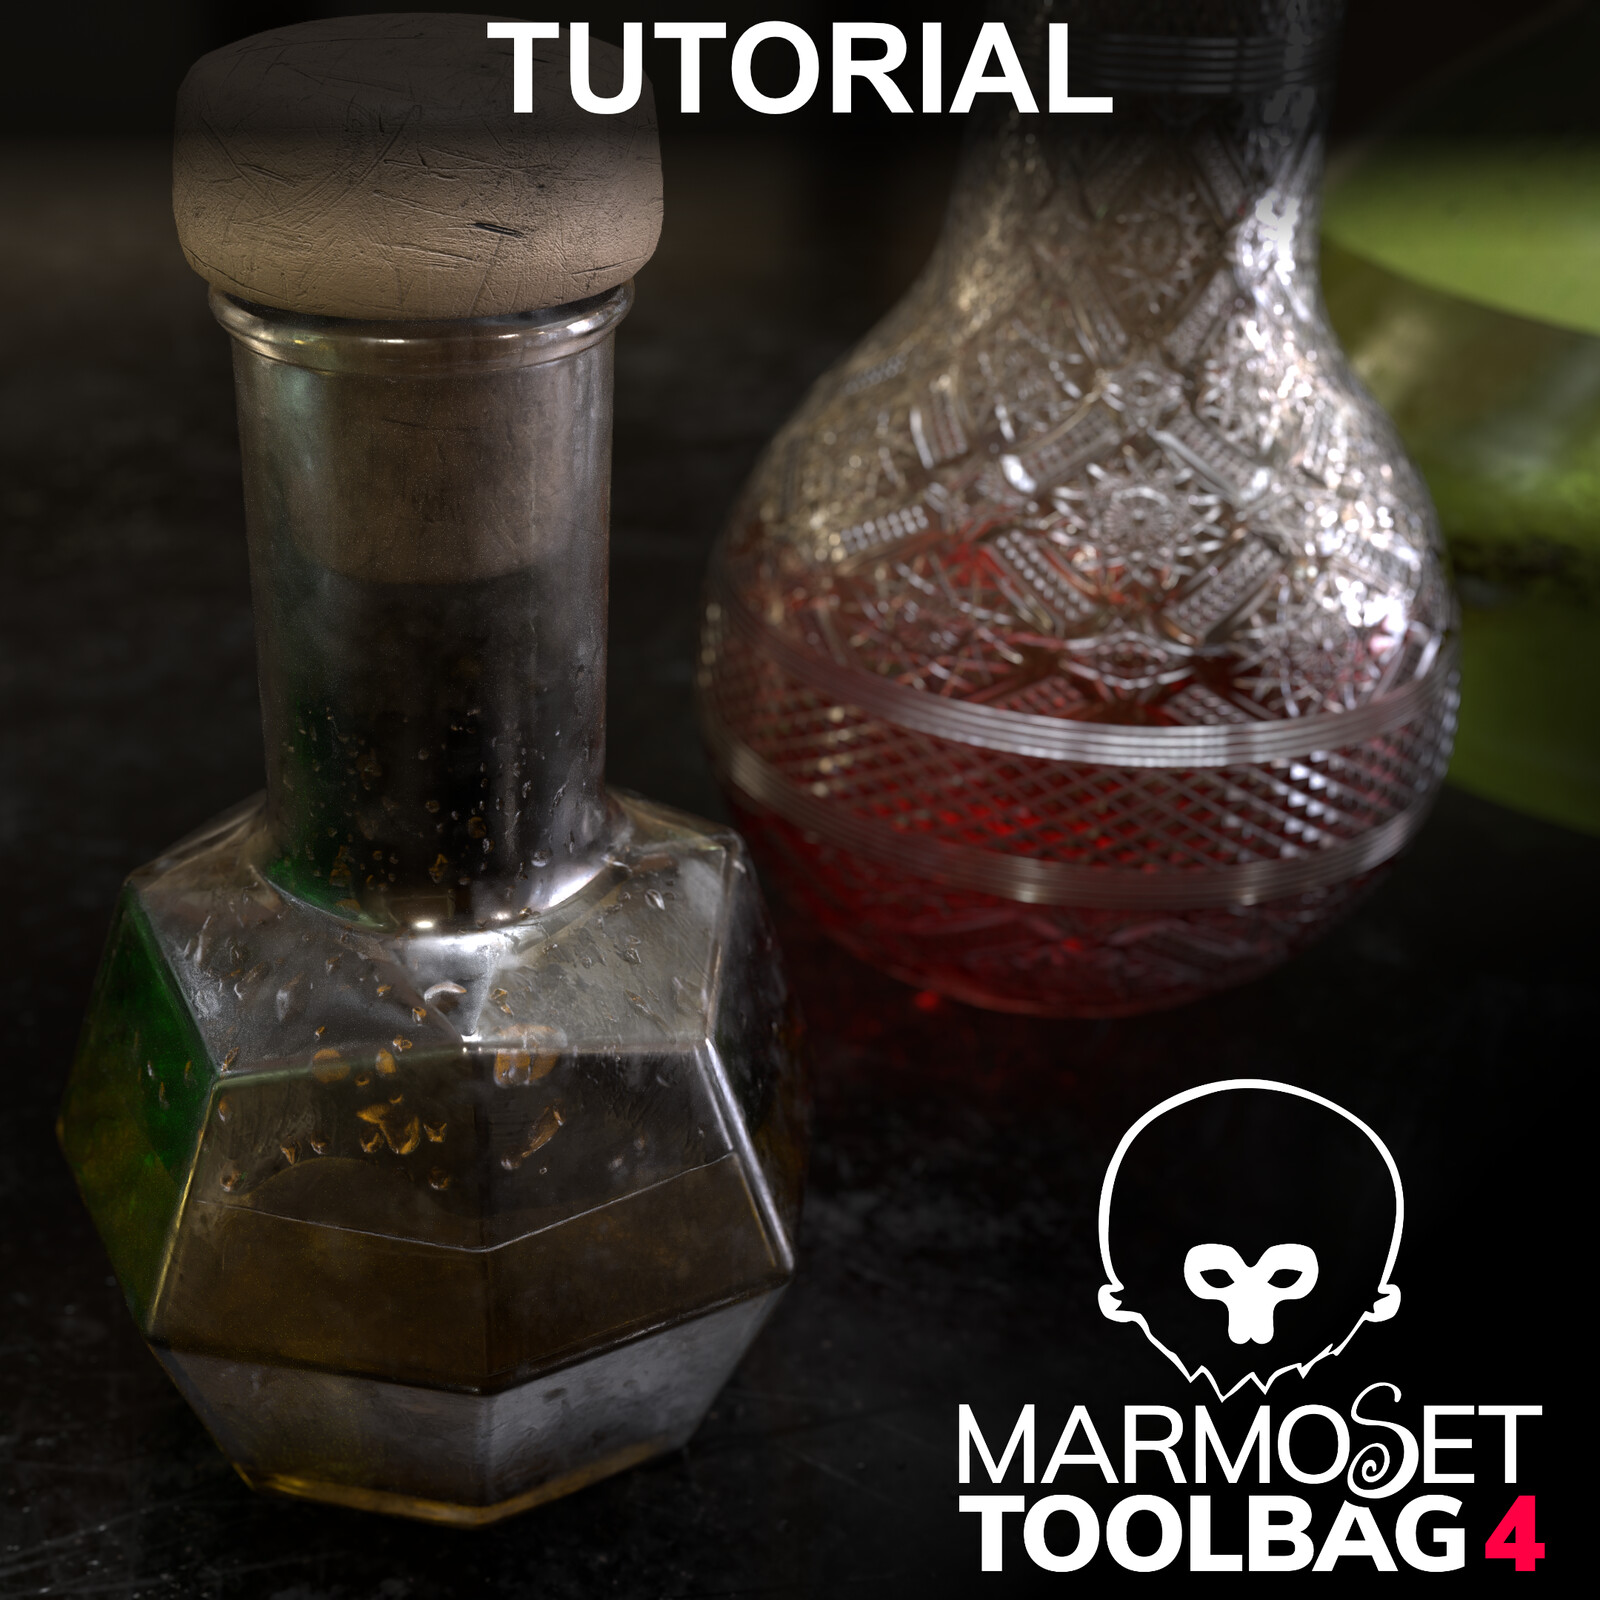 Tutorial - Texturing and Rendering Glass with Marmoset Toolbag 4